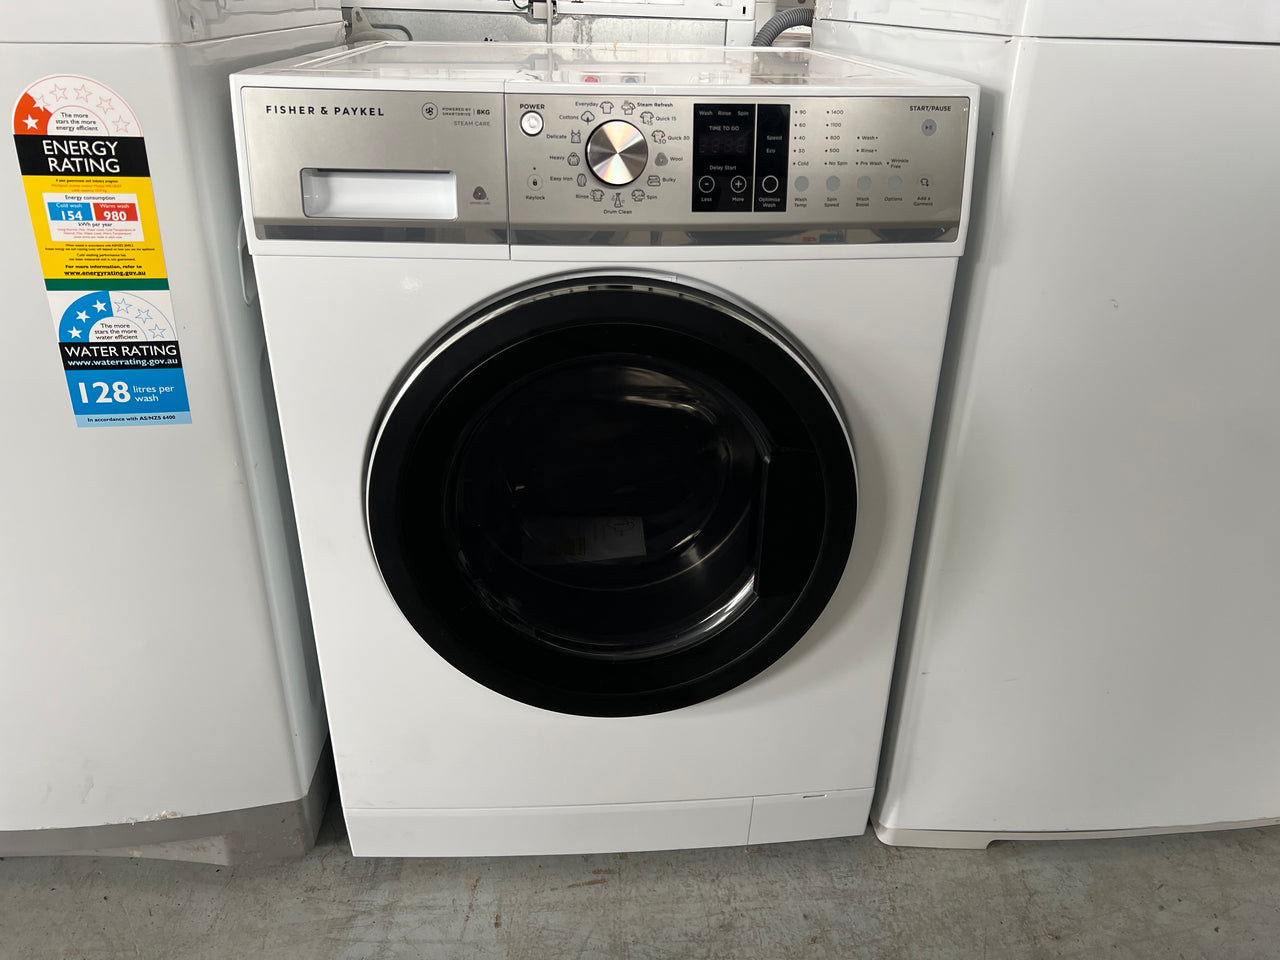 Factory second Fisher &amp; Paykel 8kg Series 5 Front Load Washing Machine with Steam Refresh Model: WH8060P3 - Second Hand Appliances Geebung